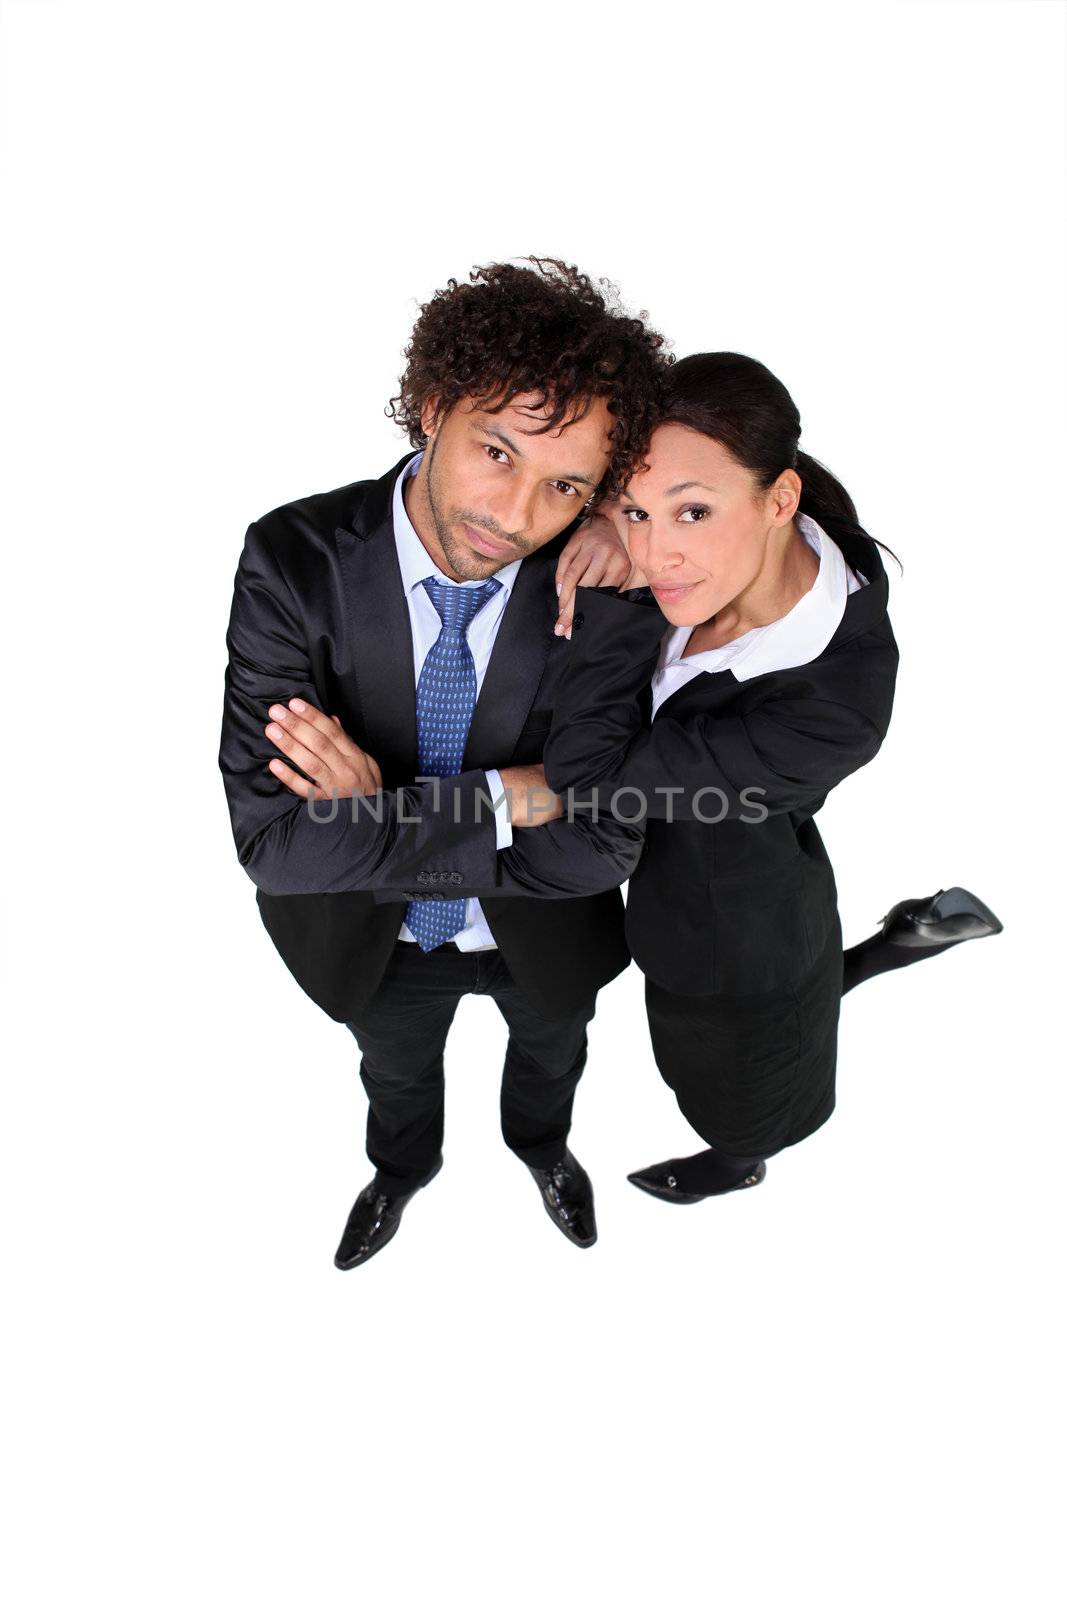 Chic business couple by phovoir